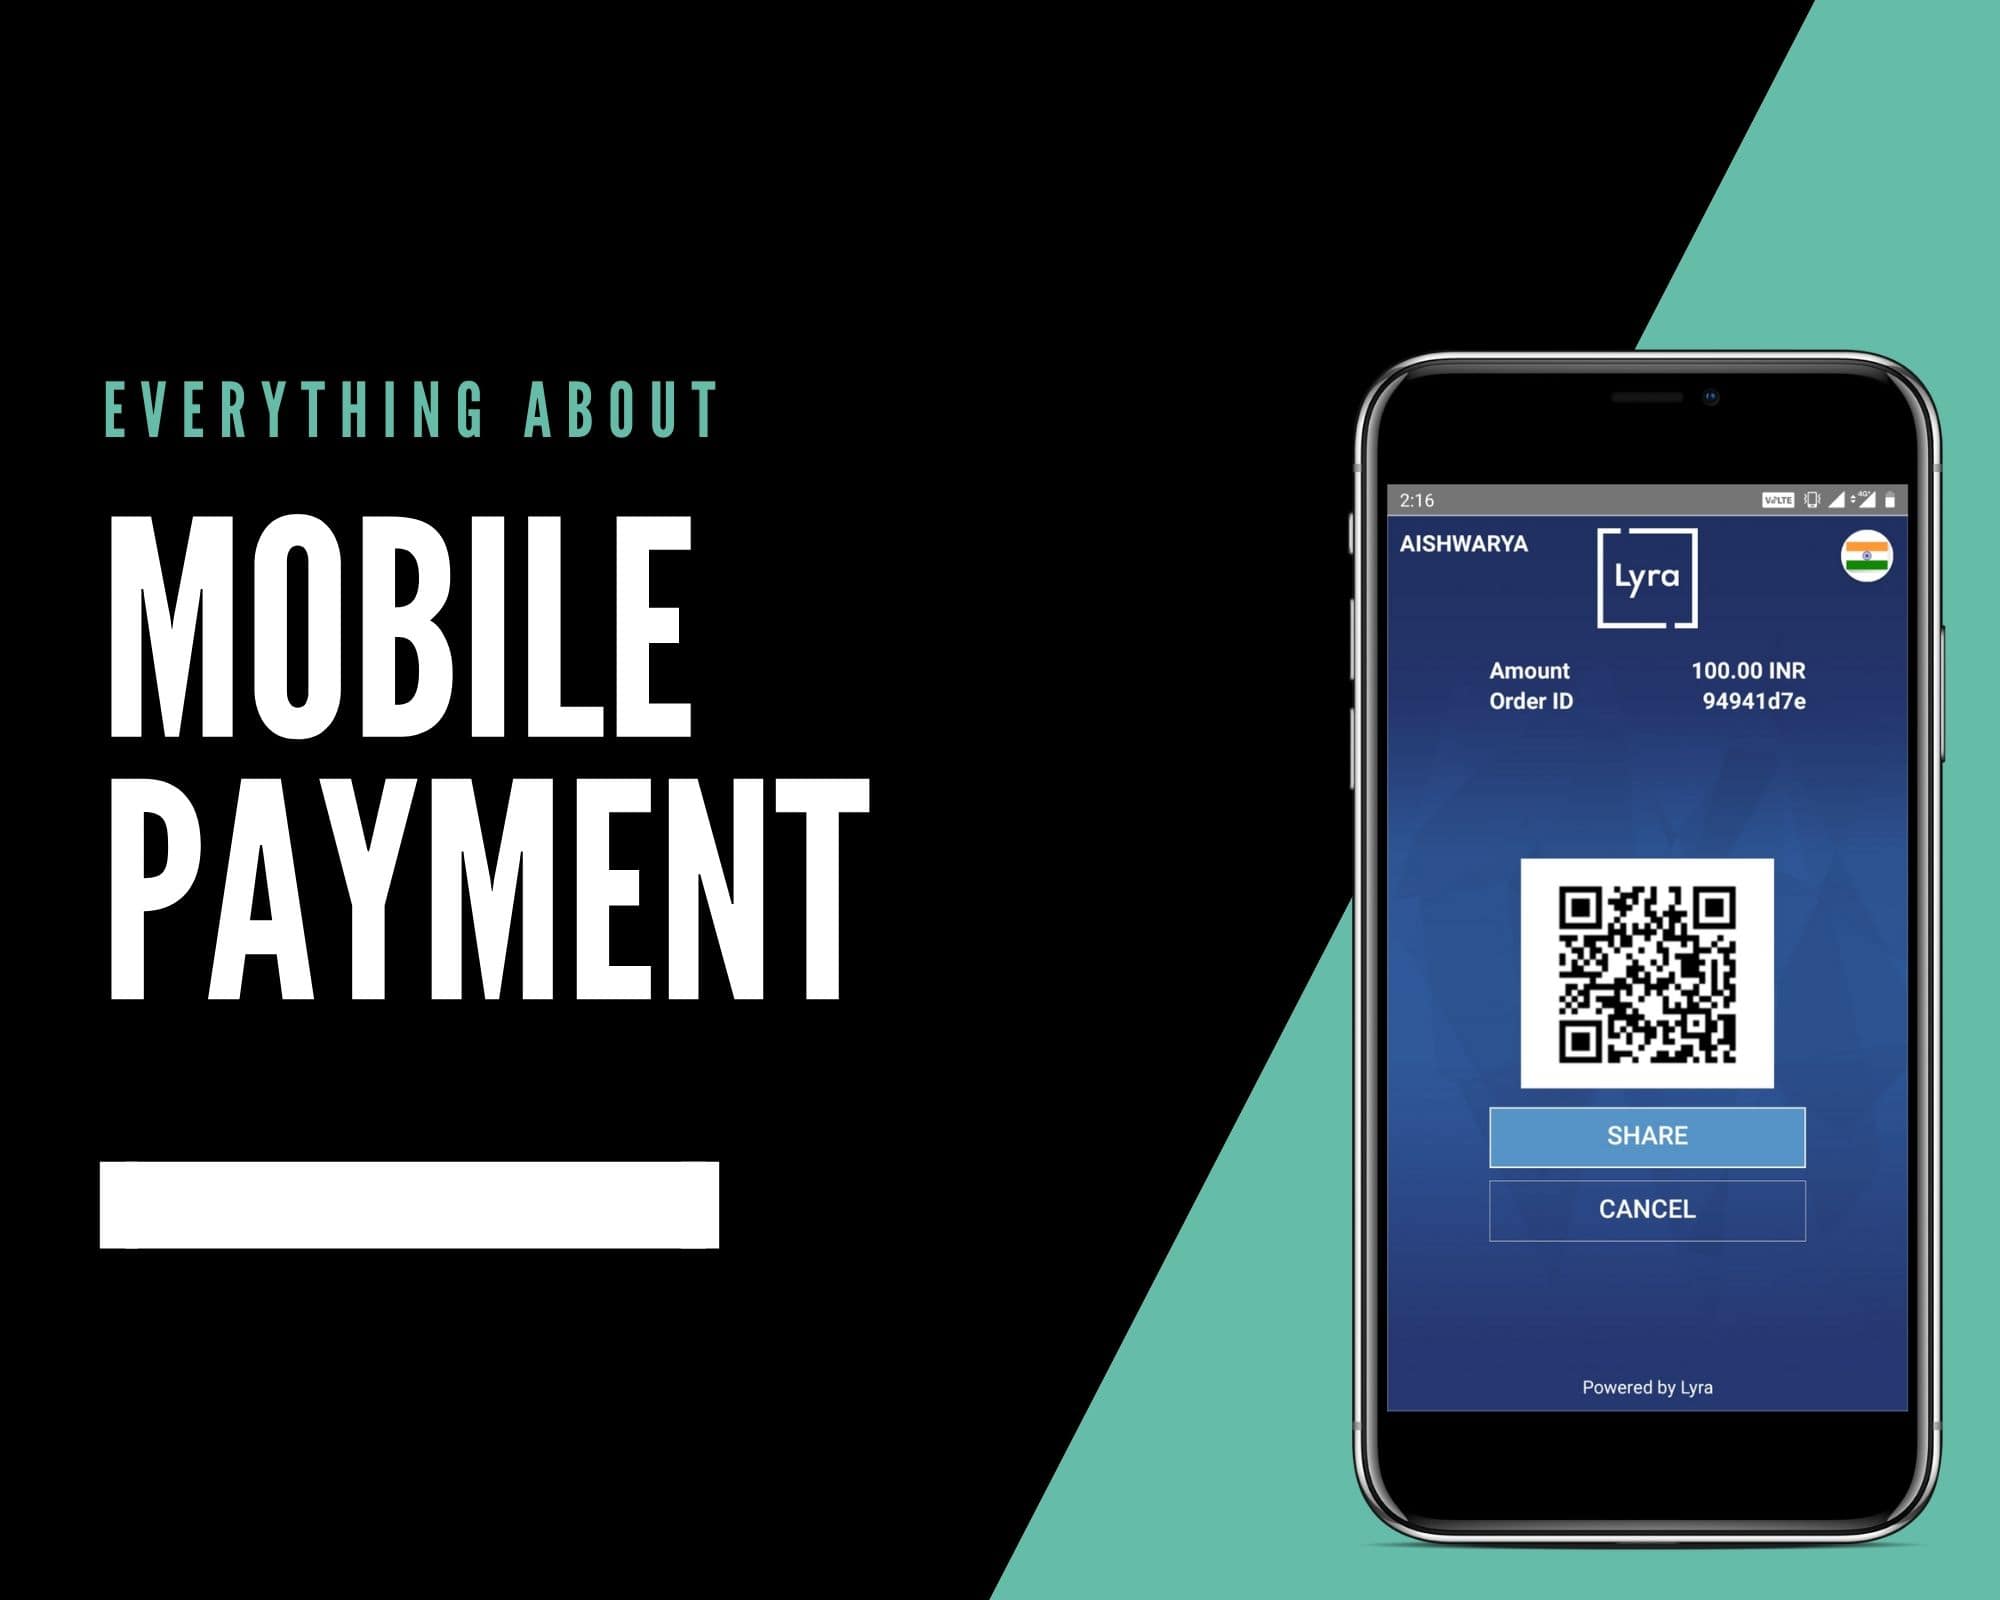 Everything-about-mobile-payments-what-are-mobile-payments-how-does-mobile-payment-works